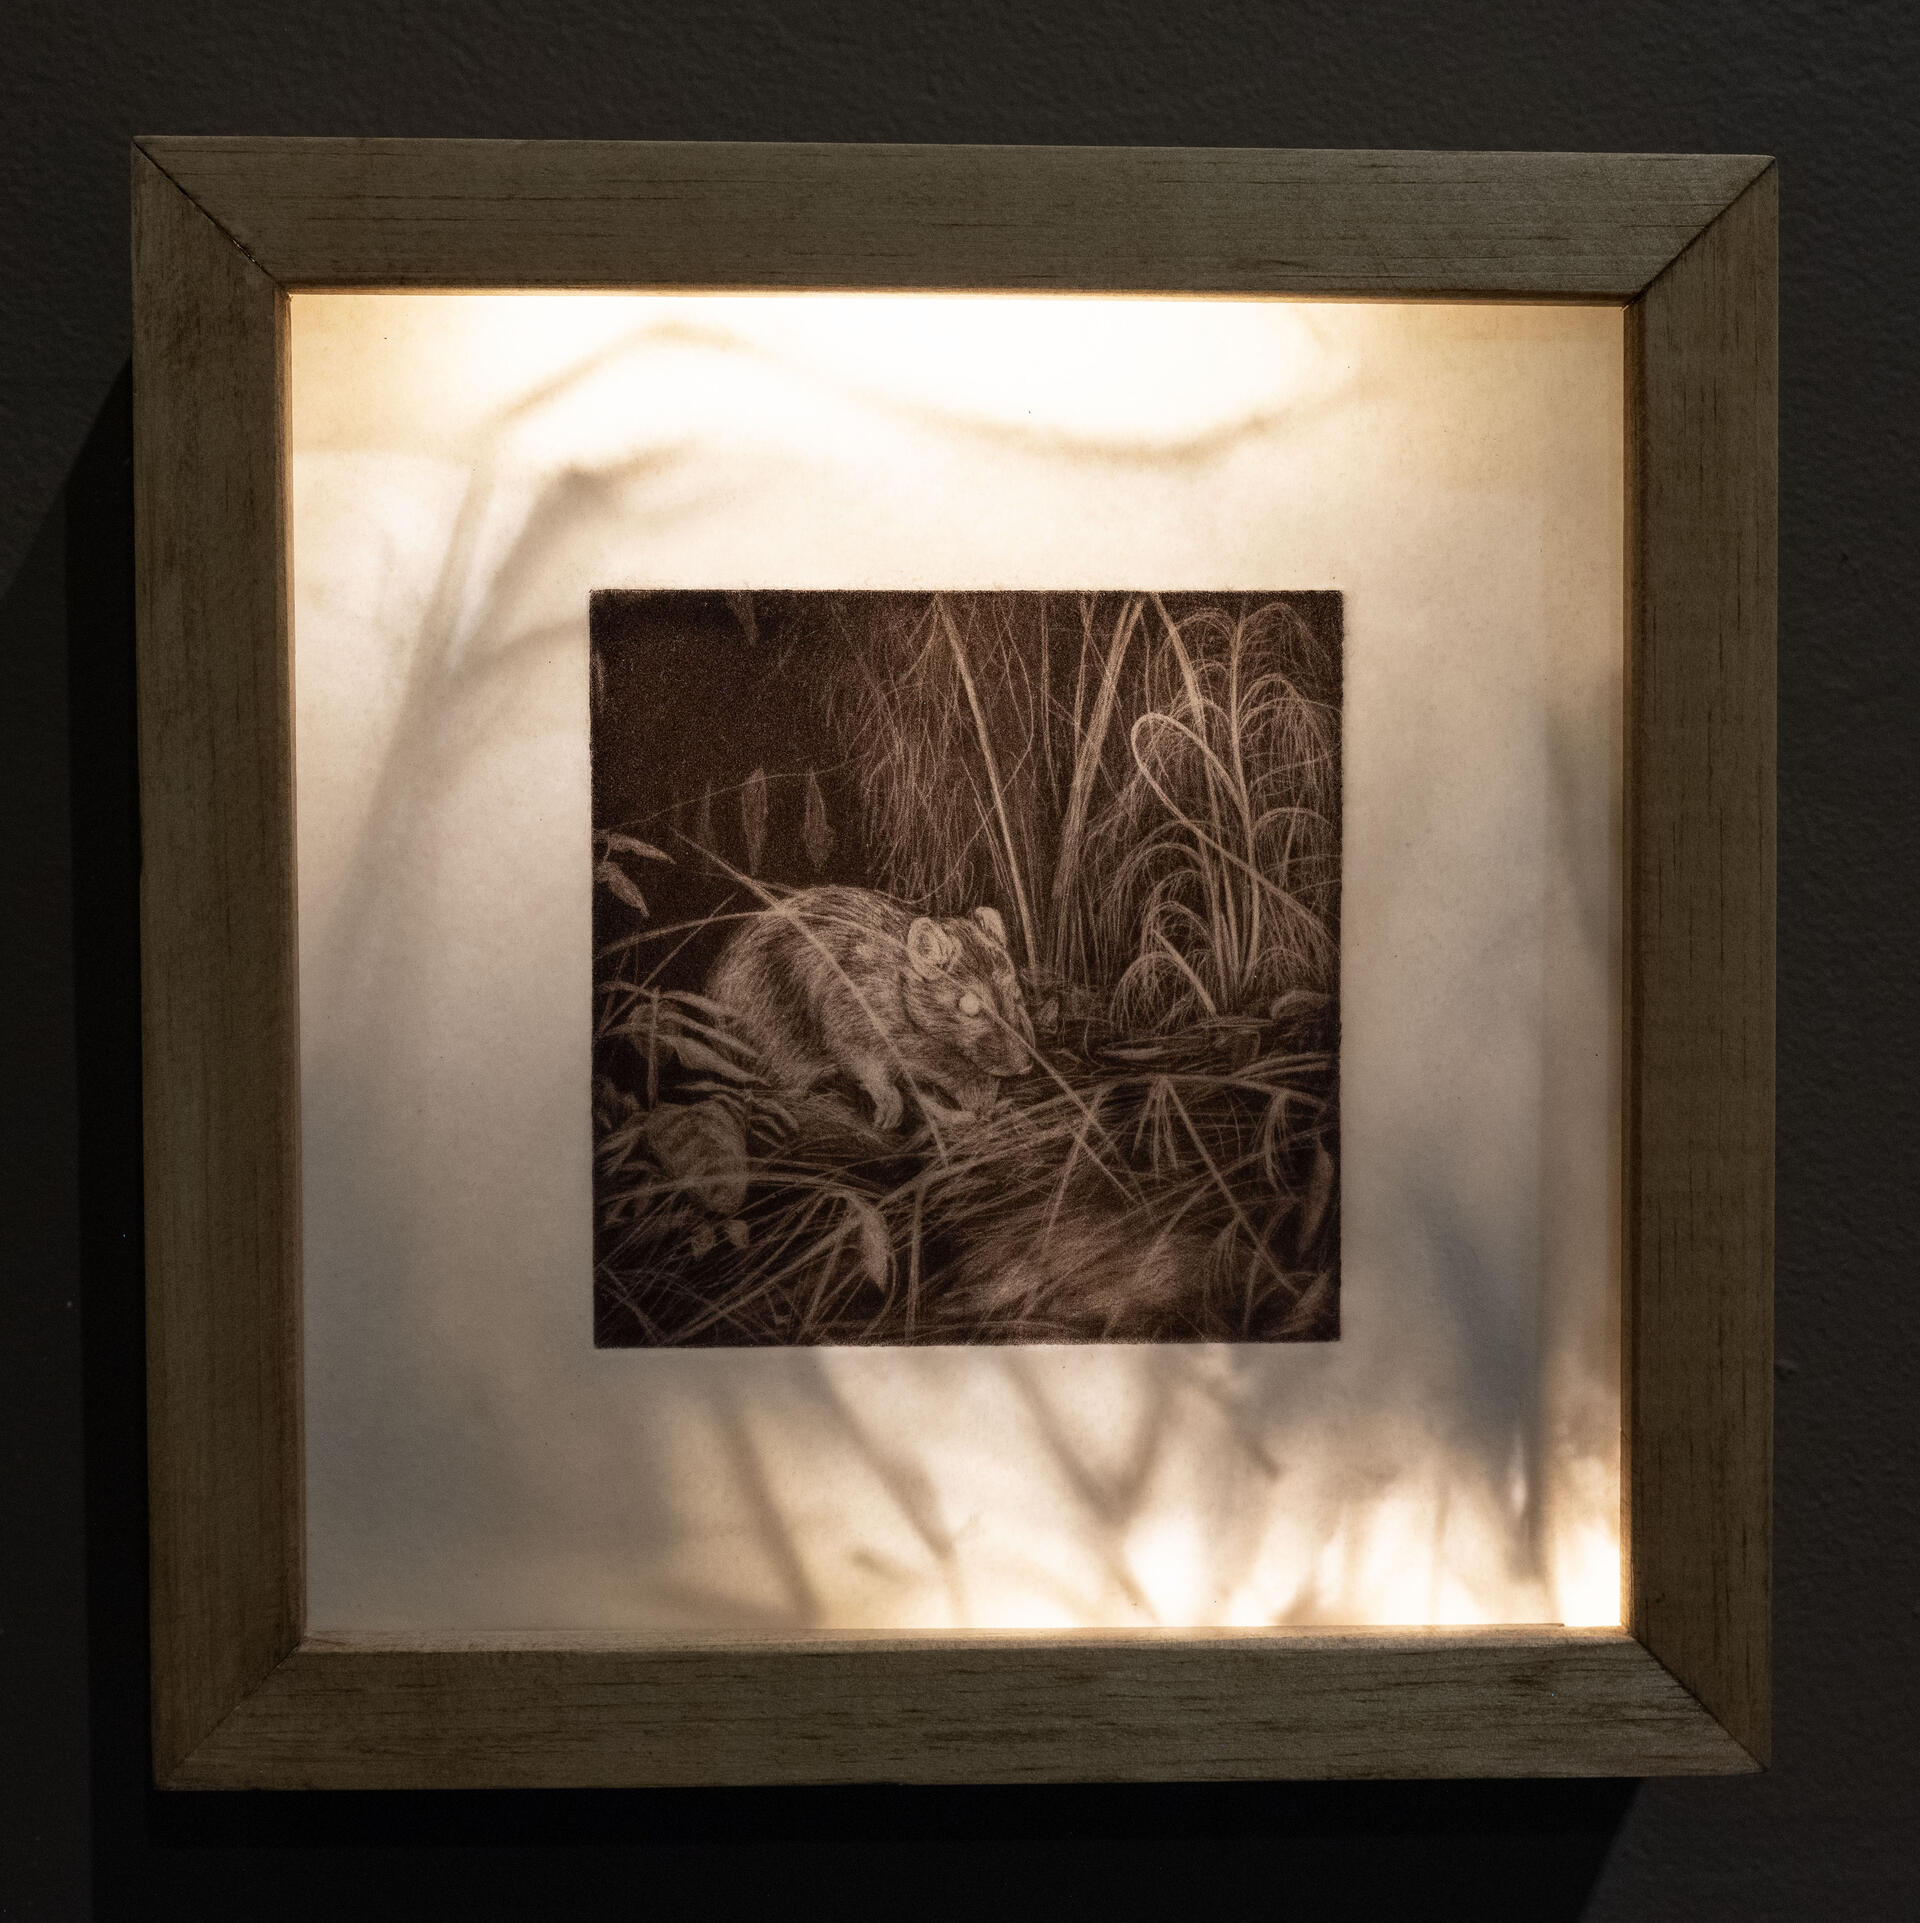 November 27, 2022, 1:05am Mezzotint print and beeswax 4x4in